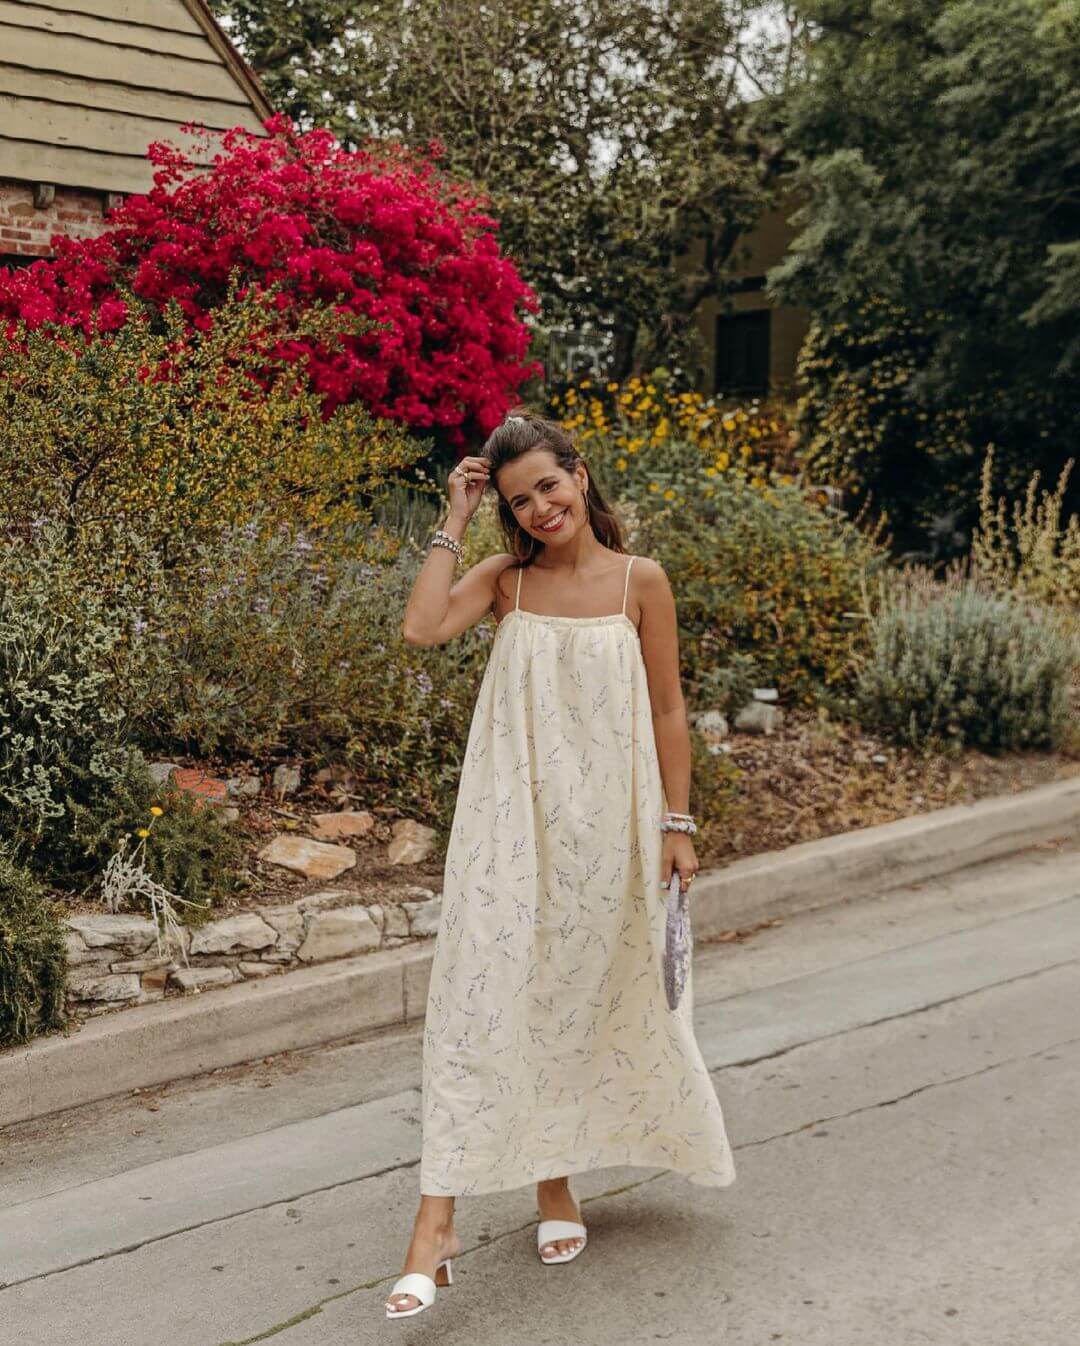 10 Dreamy Wedding Guest Outfits To Try In 2022 - The Cool Hour